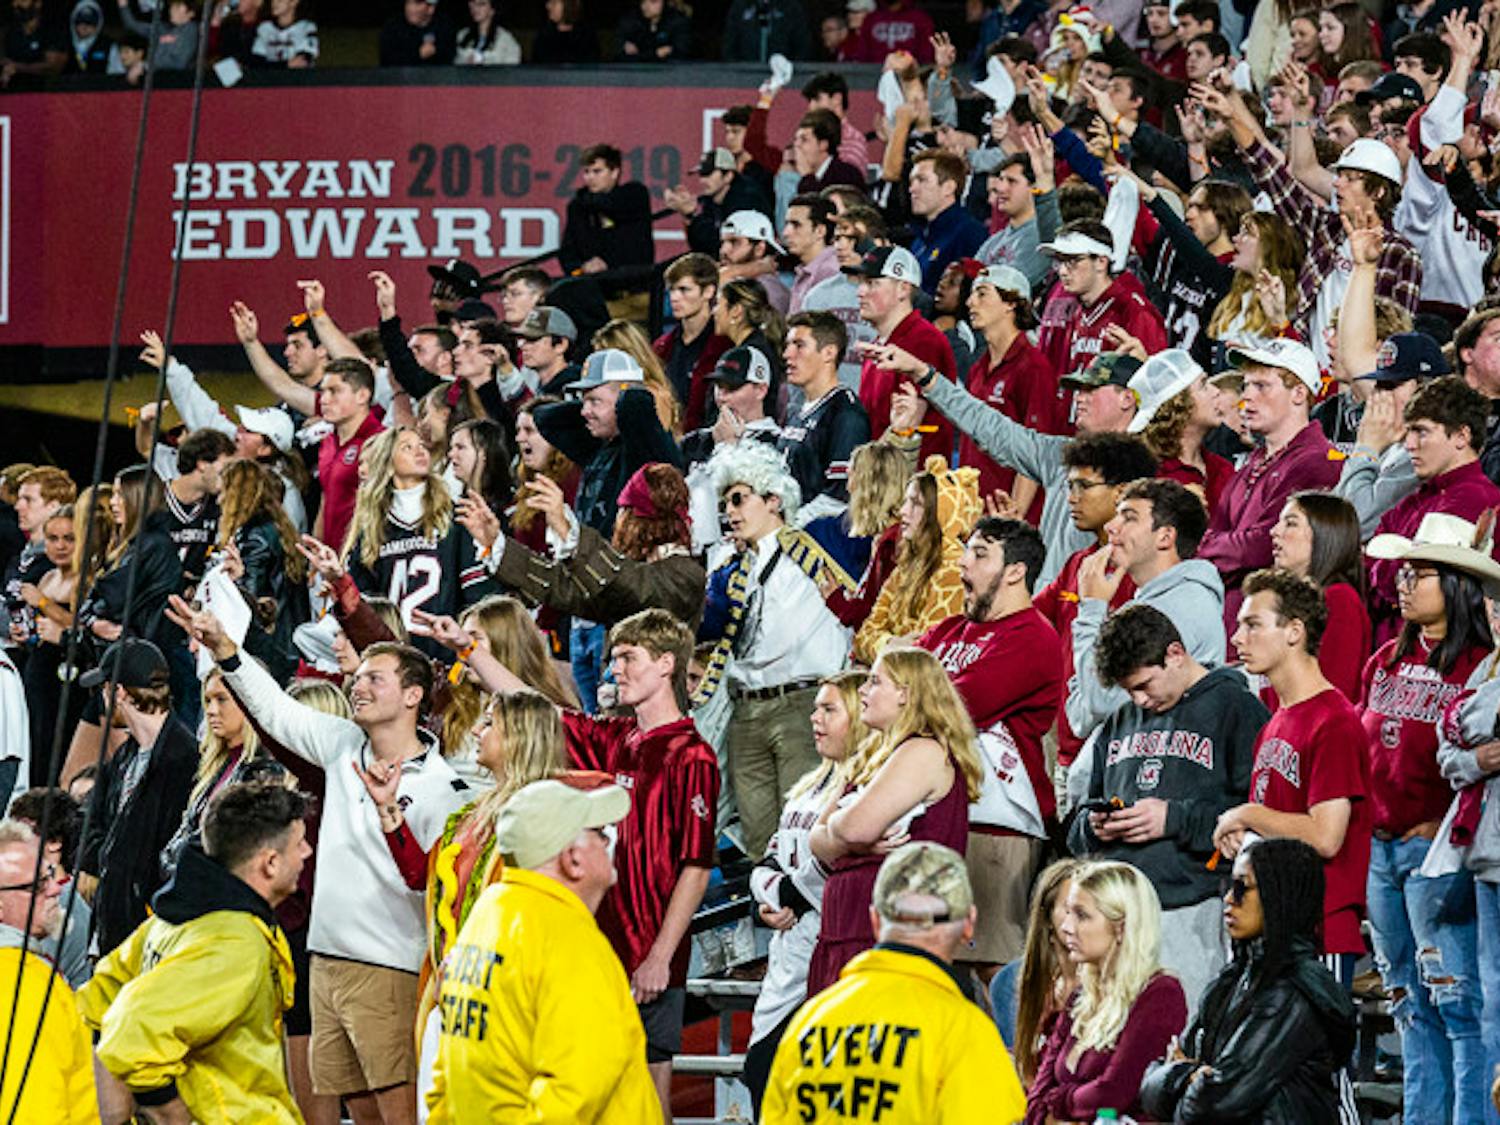 Students shout and cheer on third down during the matchup between South Carolina and Missouri on Oct. 29, 2022. The game fell on the weekend of Halloween, prompting many students and fans to dawn their costumes for the game. Missouri beat the Gamecocks 23-10.